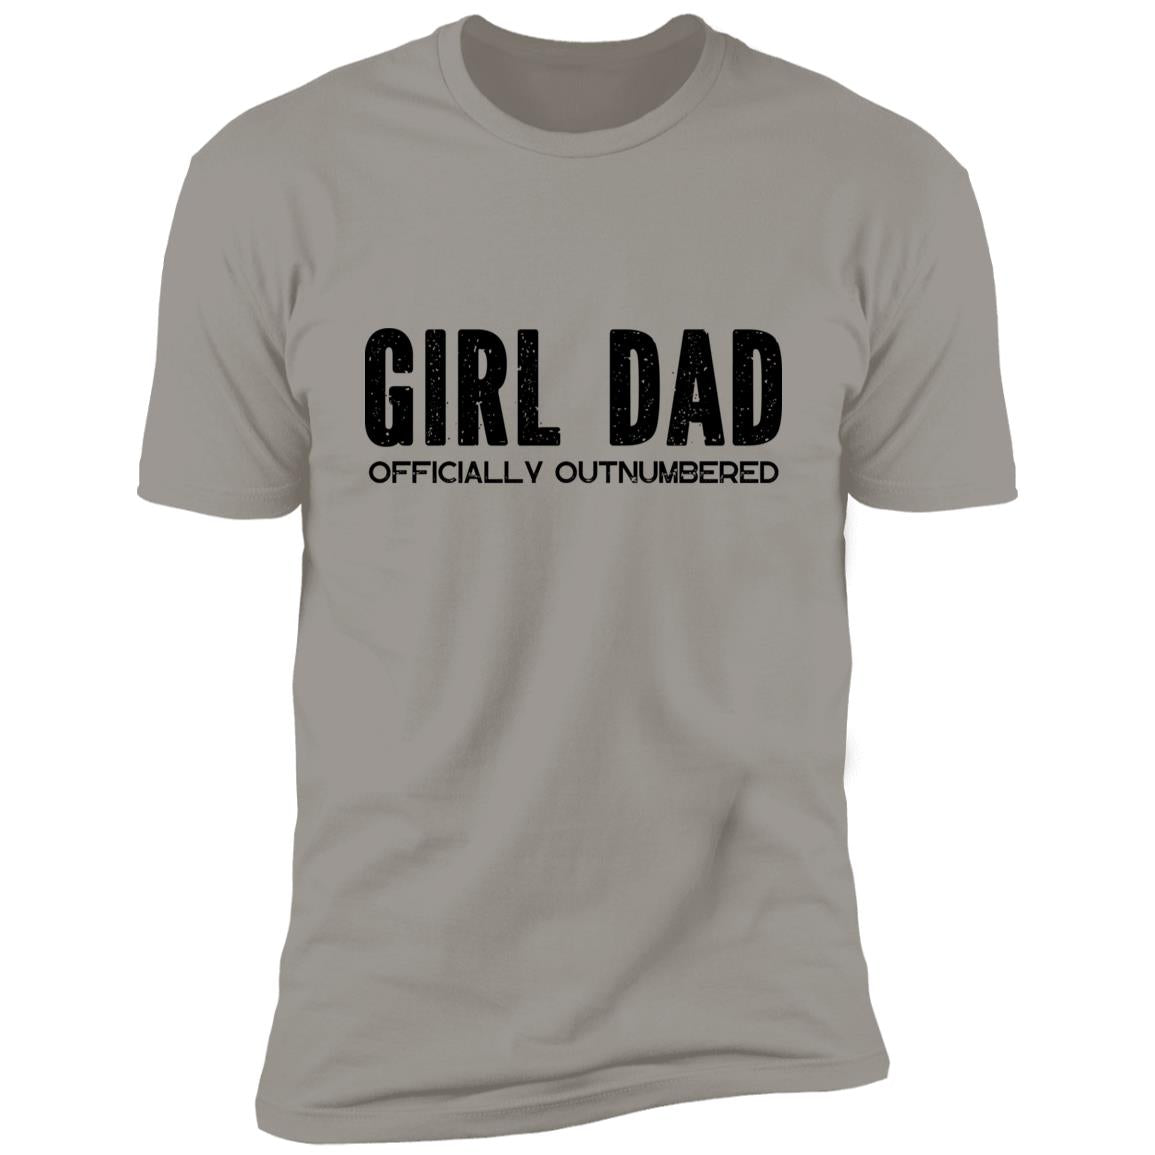 Girl Dad Officially Outnumbered TShirt